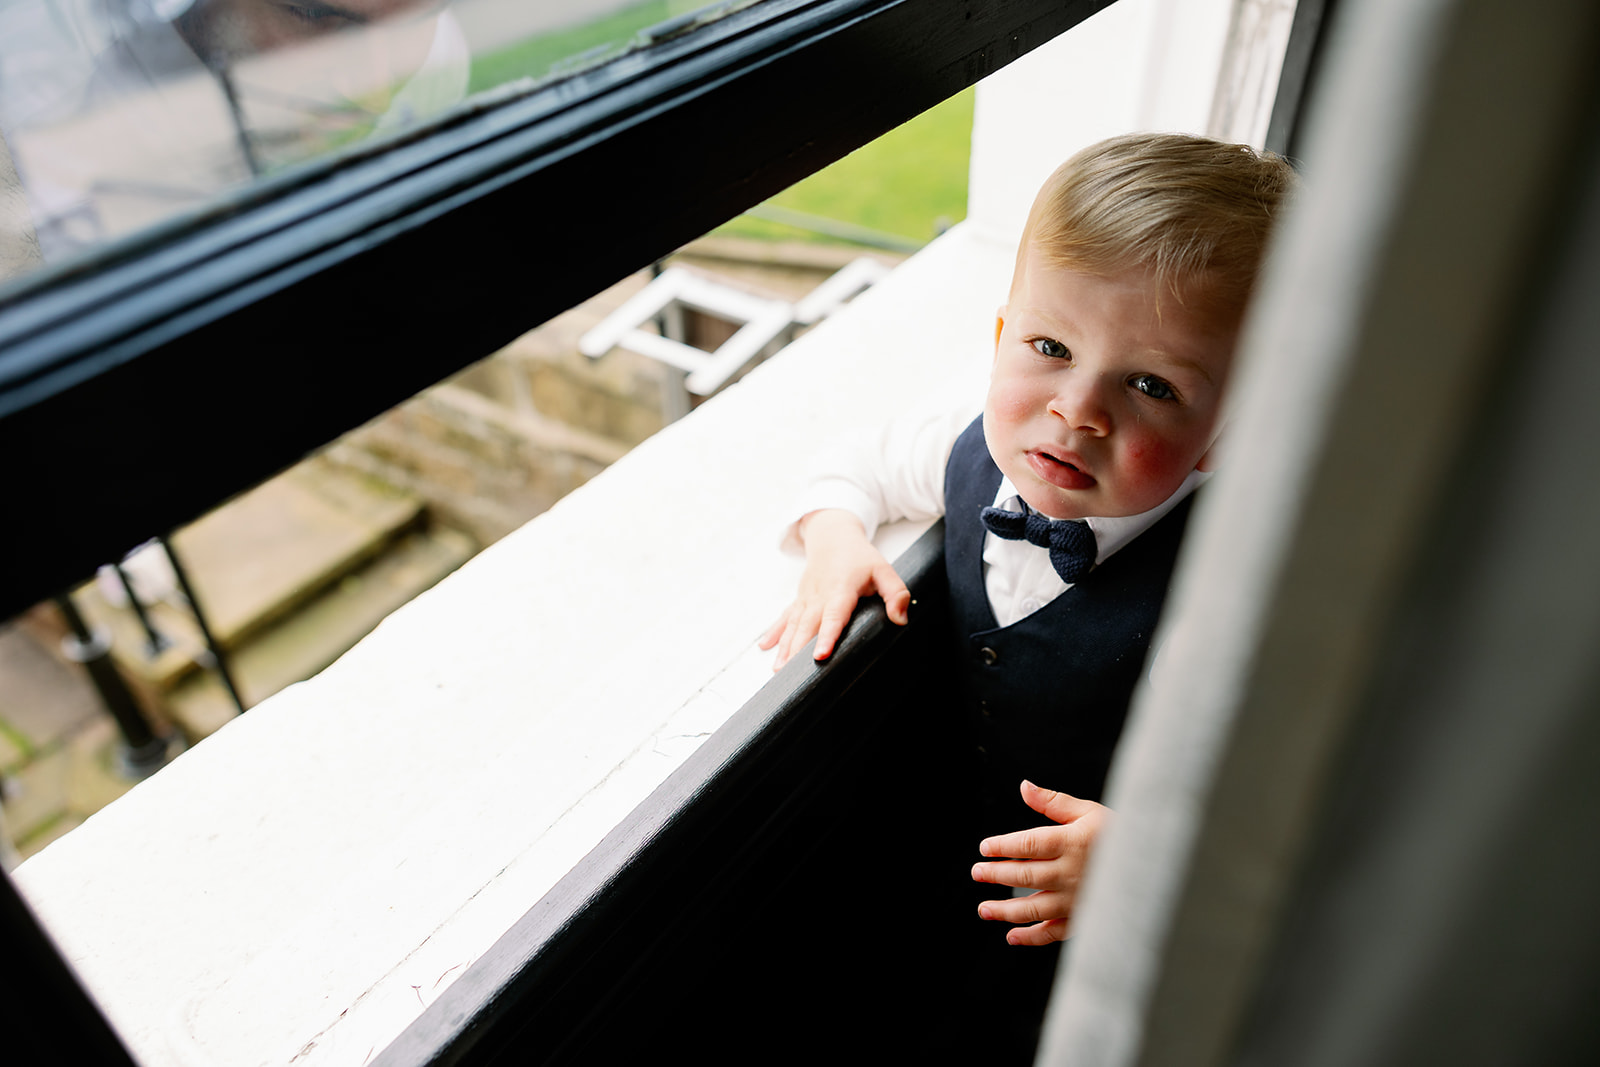 A pageboy looking out of the window